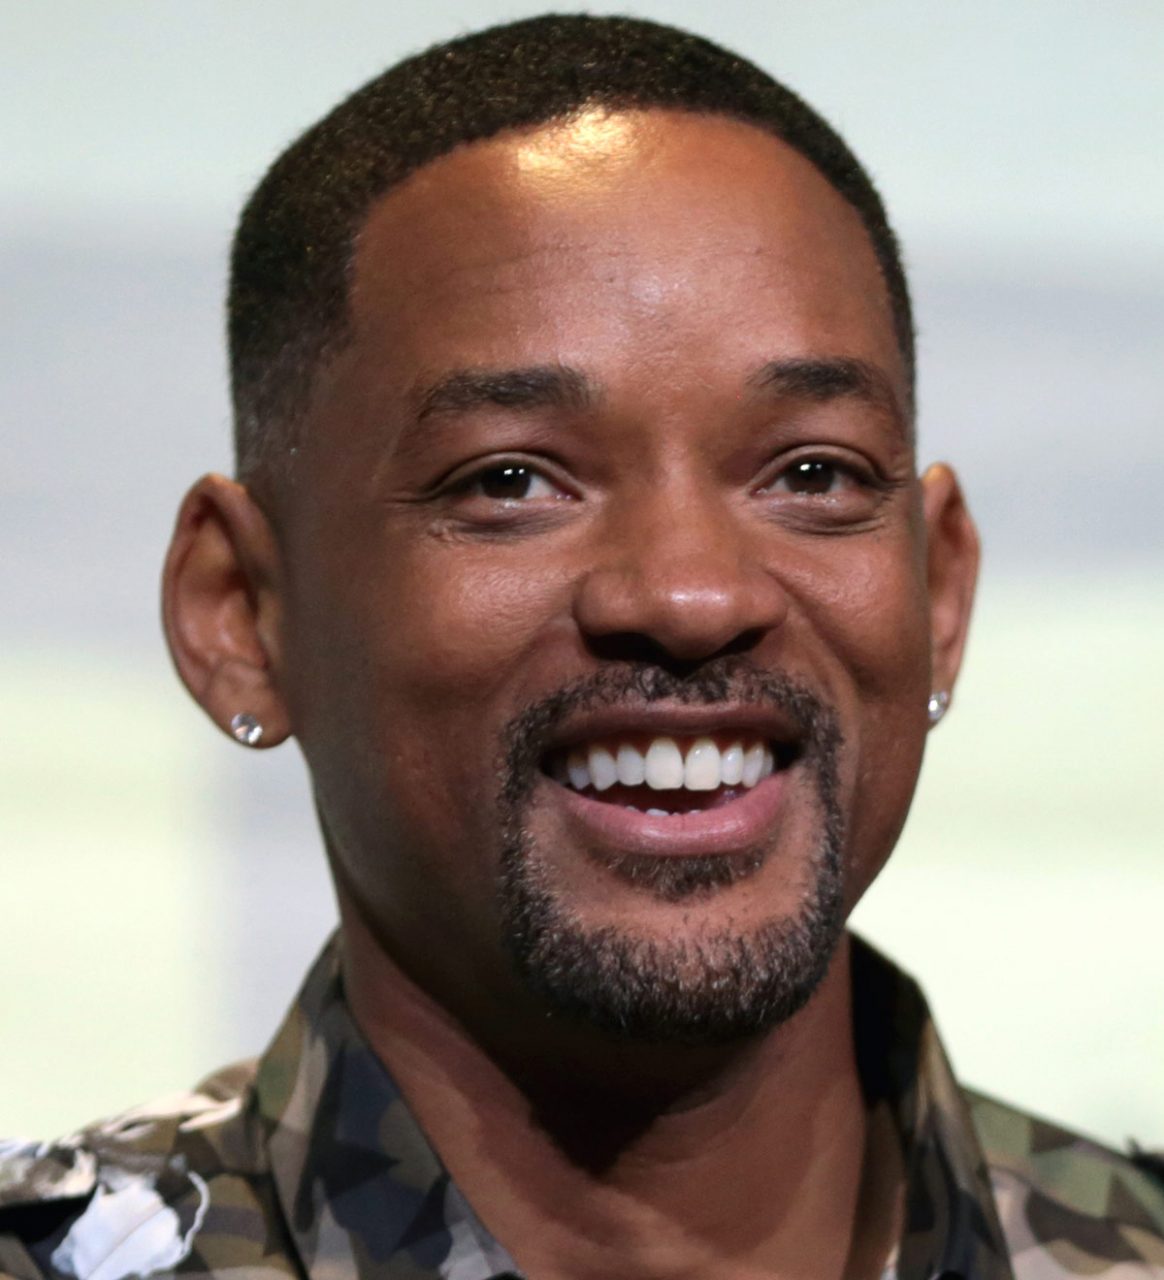 Will Smith vacationed in Cabo San Lucas